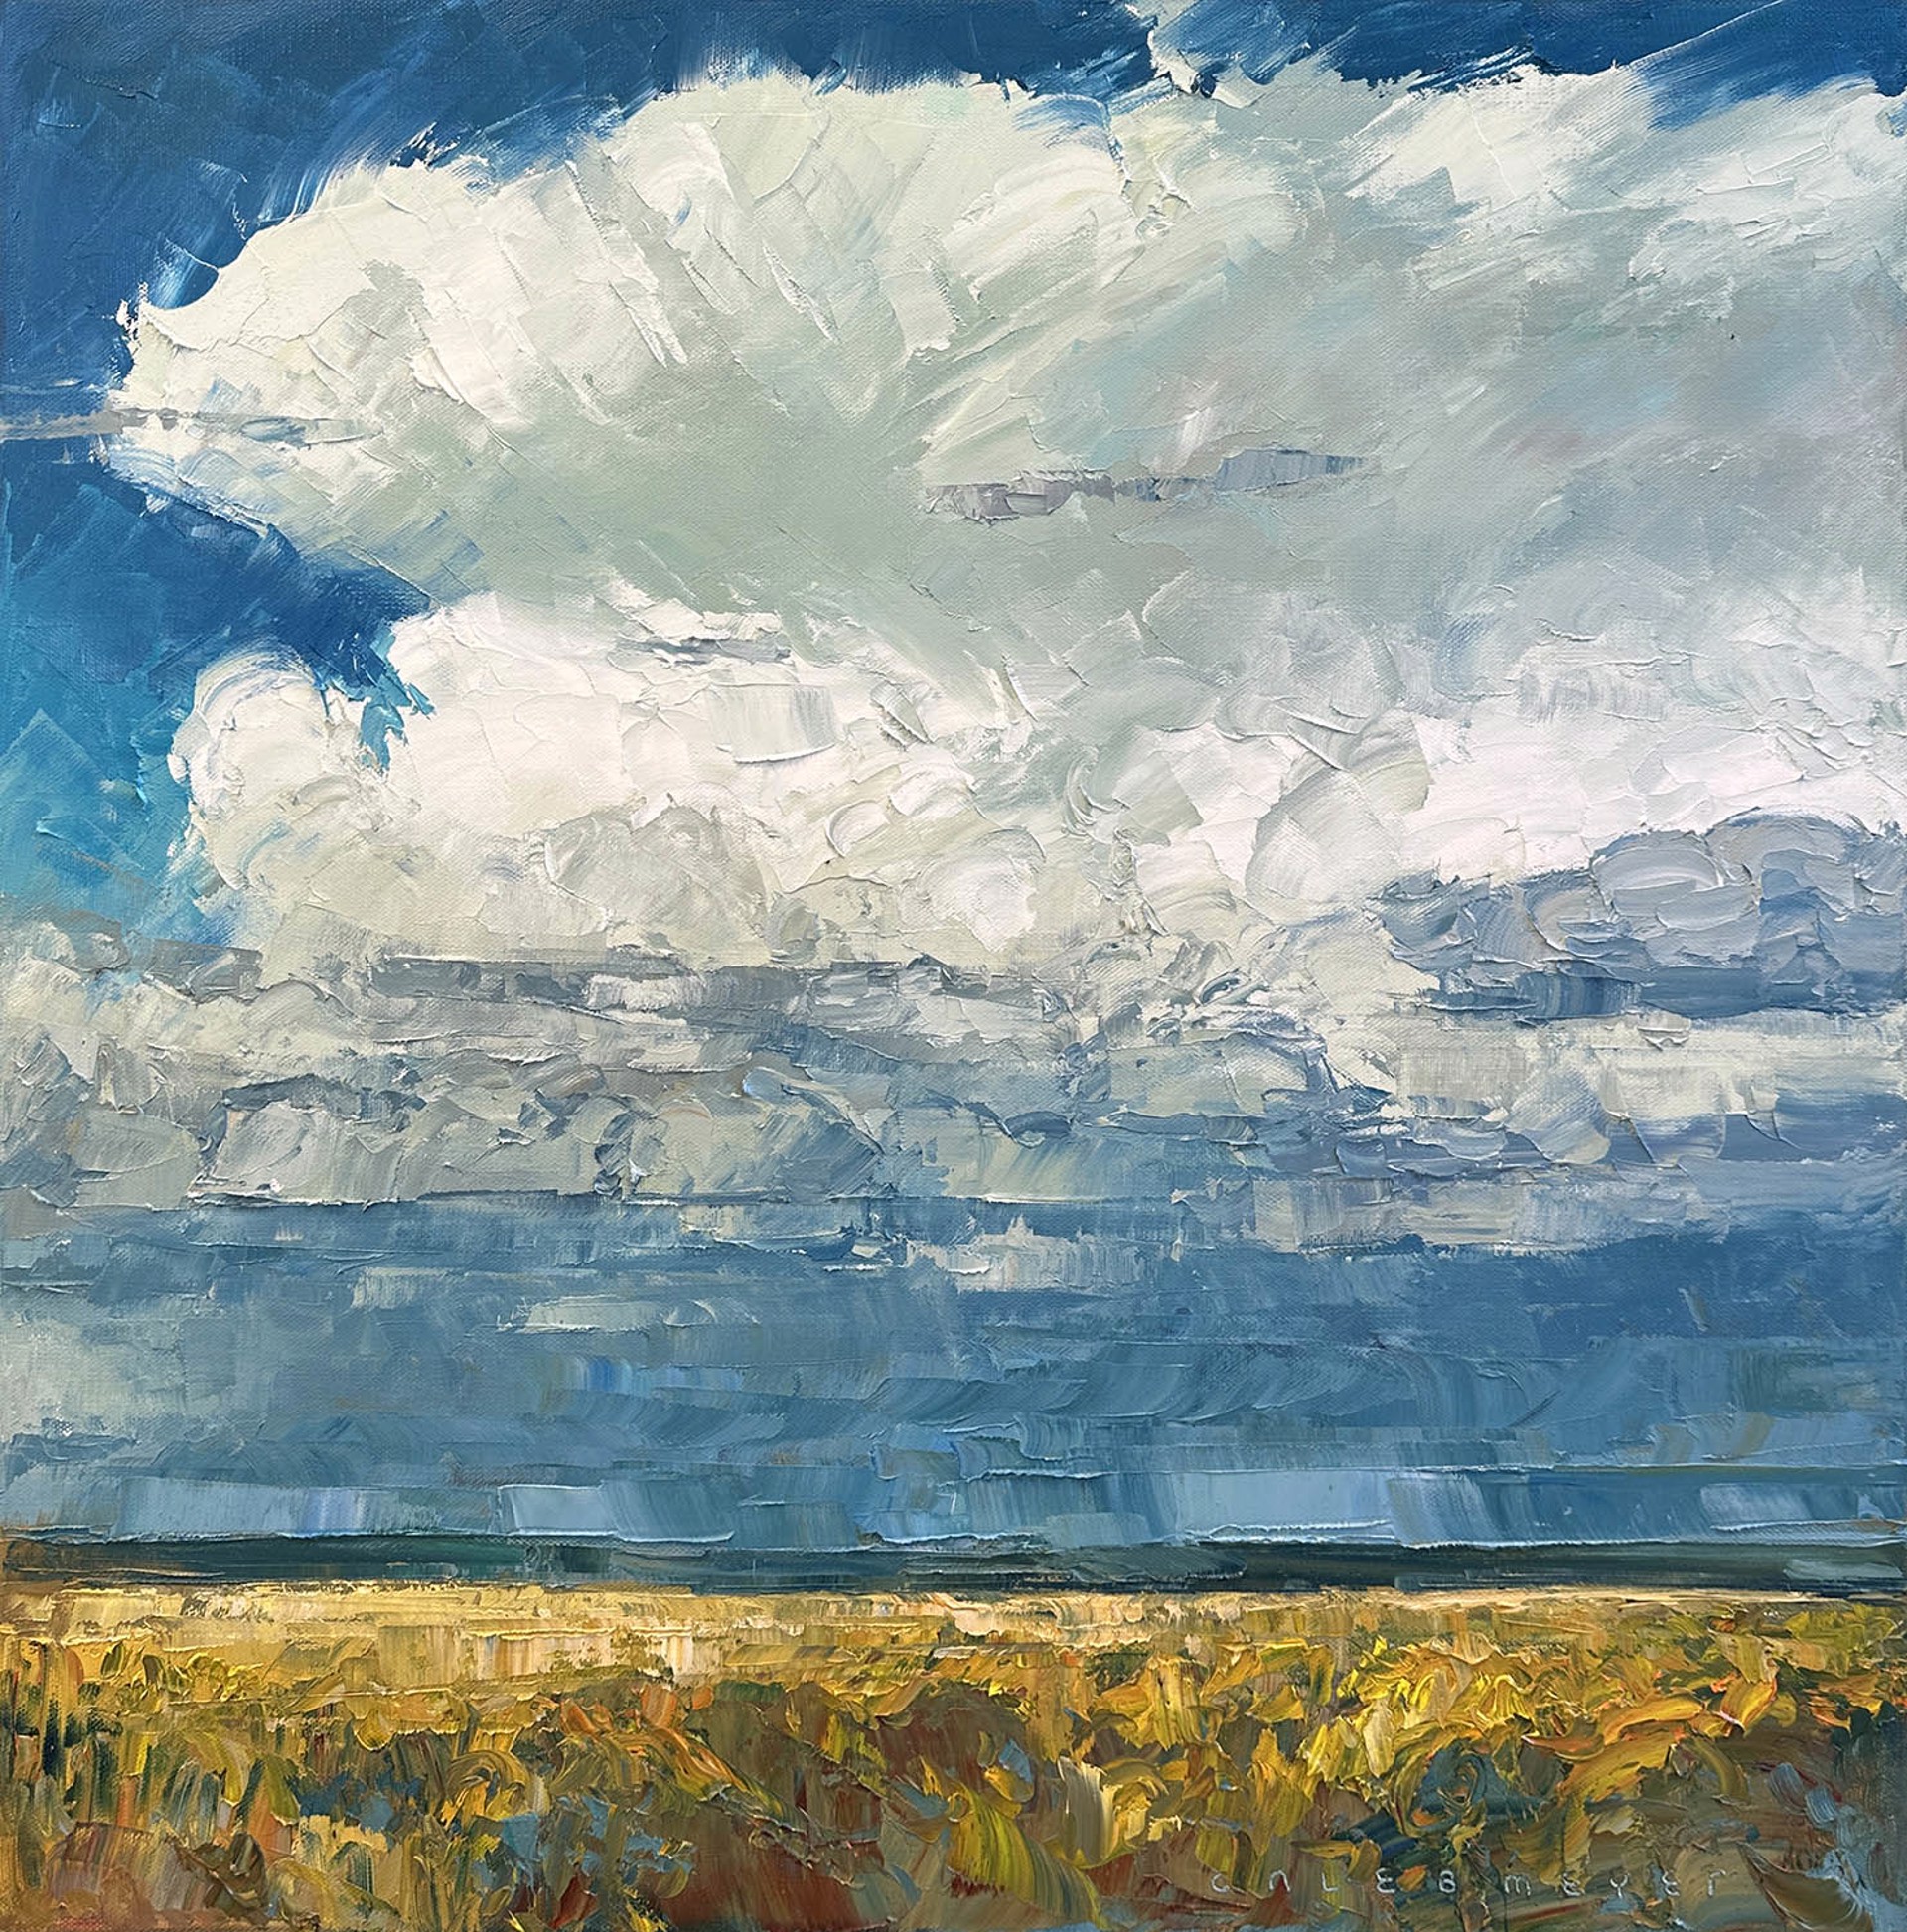 Original Palette Knife Oil Landscape Painting By Caleb Meyer Featuring Storm Clouds Rolling Over The Plains